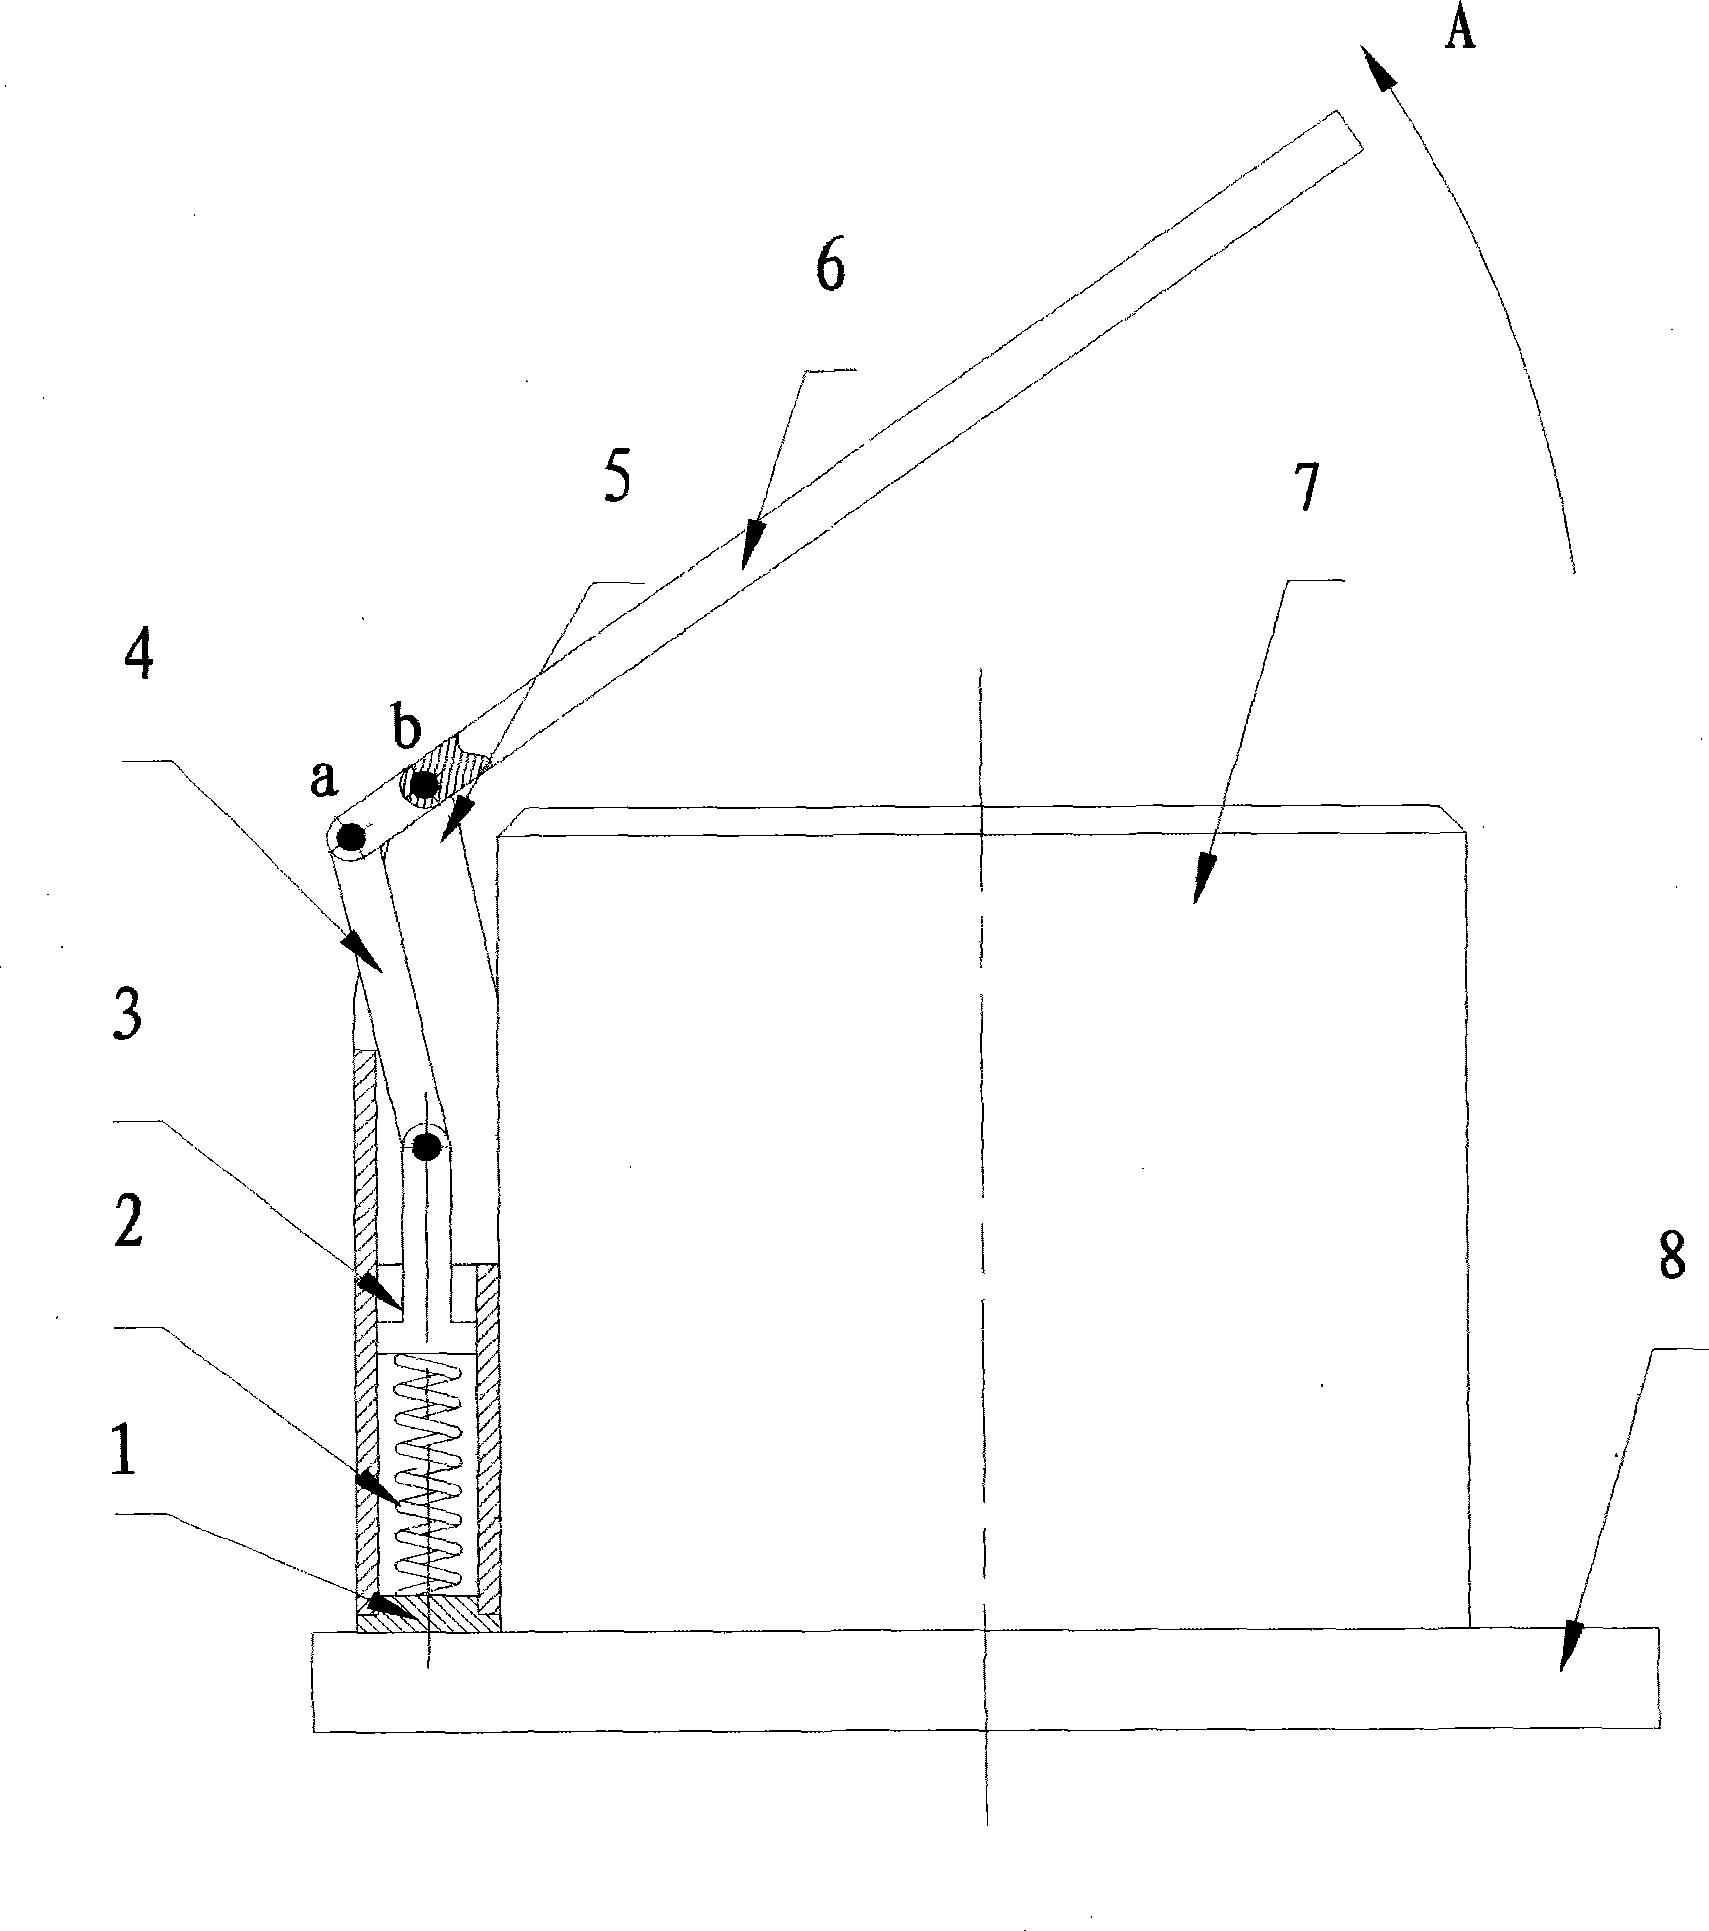 Cover turnover type flame preventing device for connector capable of dismounting and dropping